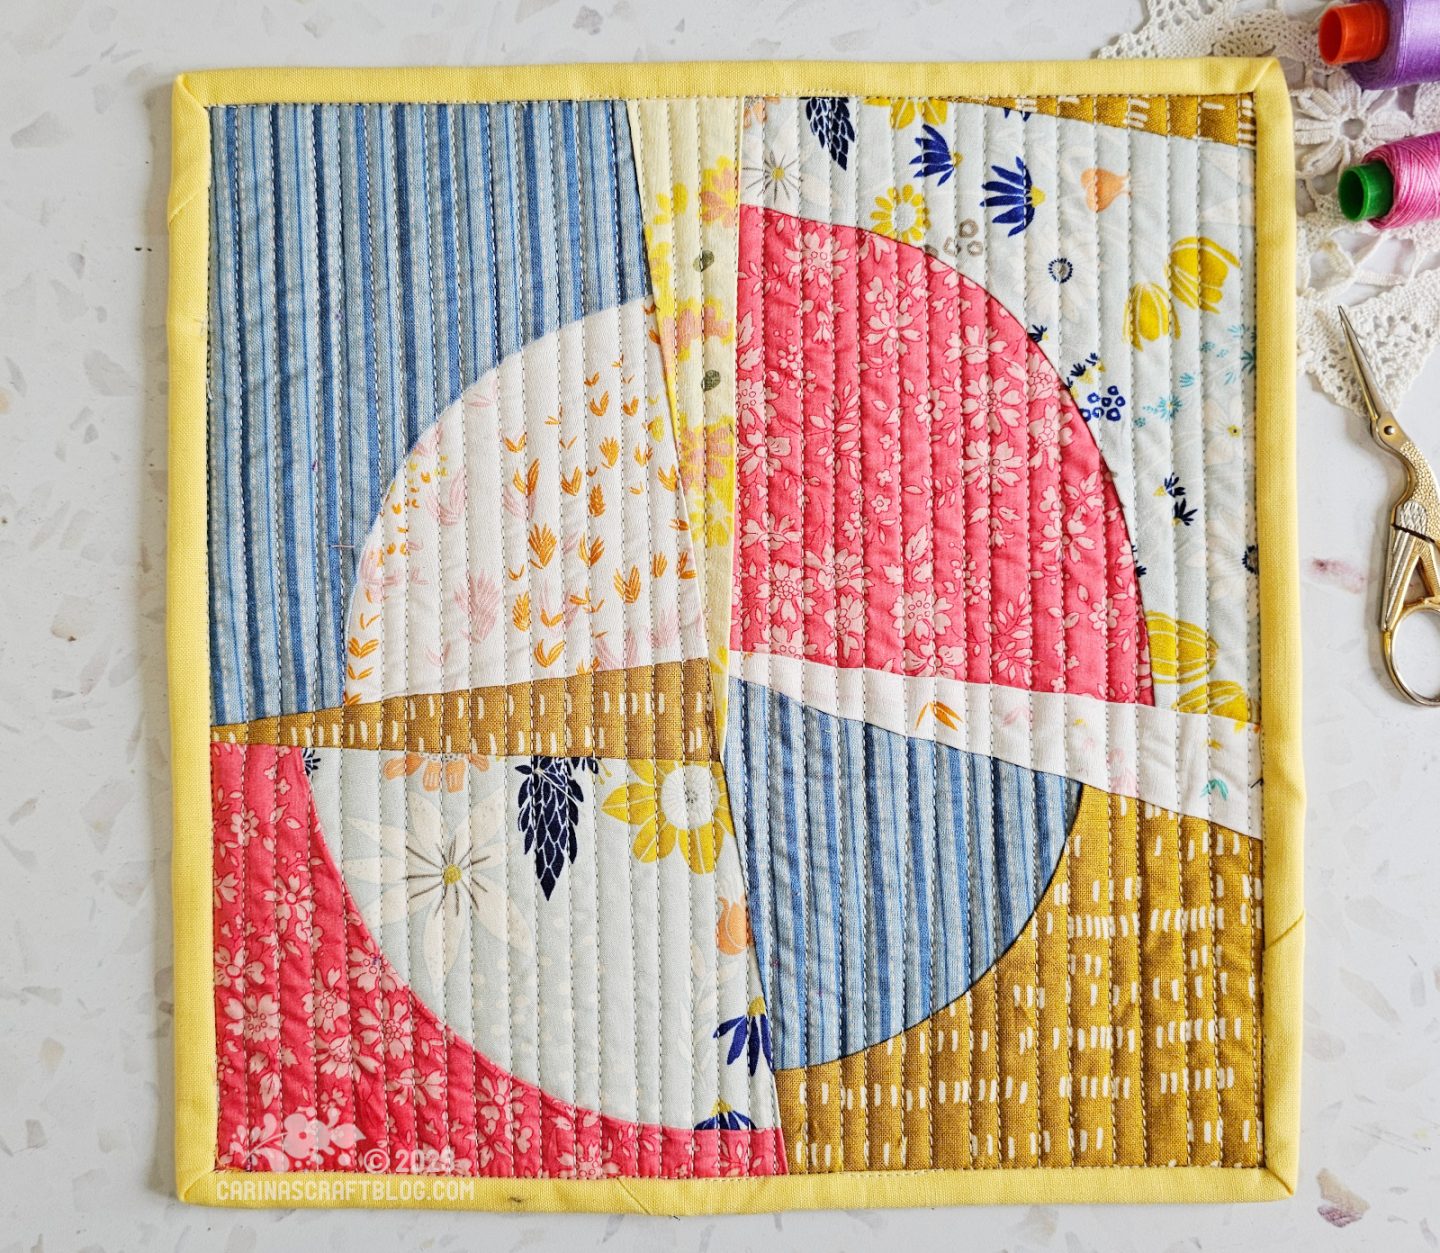 View from above of a mini quilt. Quarter circles pieced in a random way in blue, light blue, pink and mustard yellow.